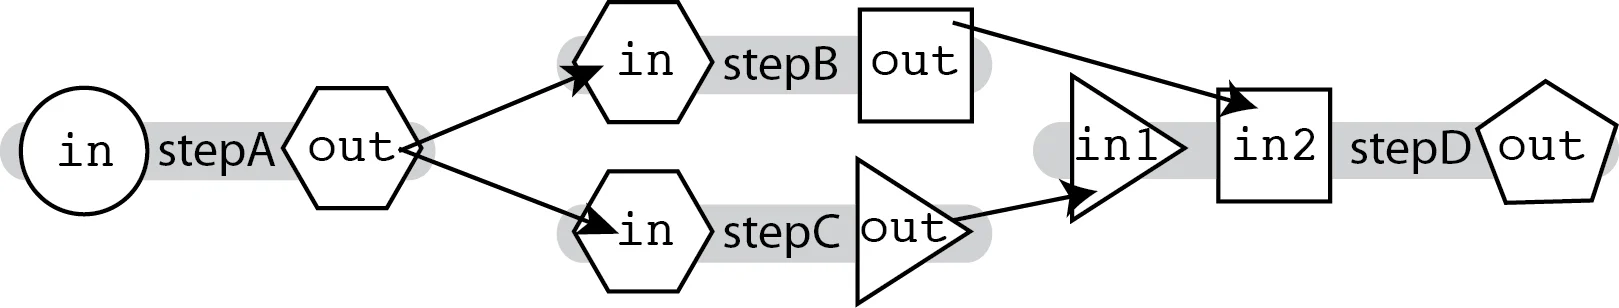 Diagram depicting input running through a process called StepA which produces an output. The output is then used as input into two separate processes running in parallel: StepB and StepC. The outputs of these parallel steps are then used as input into a process StepD.